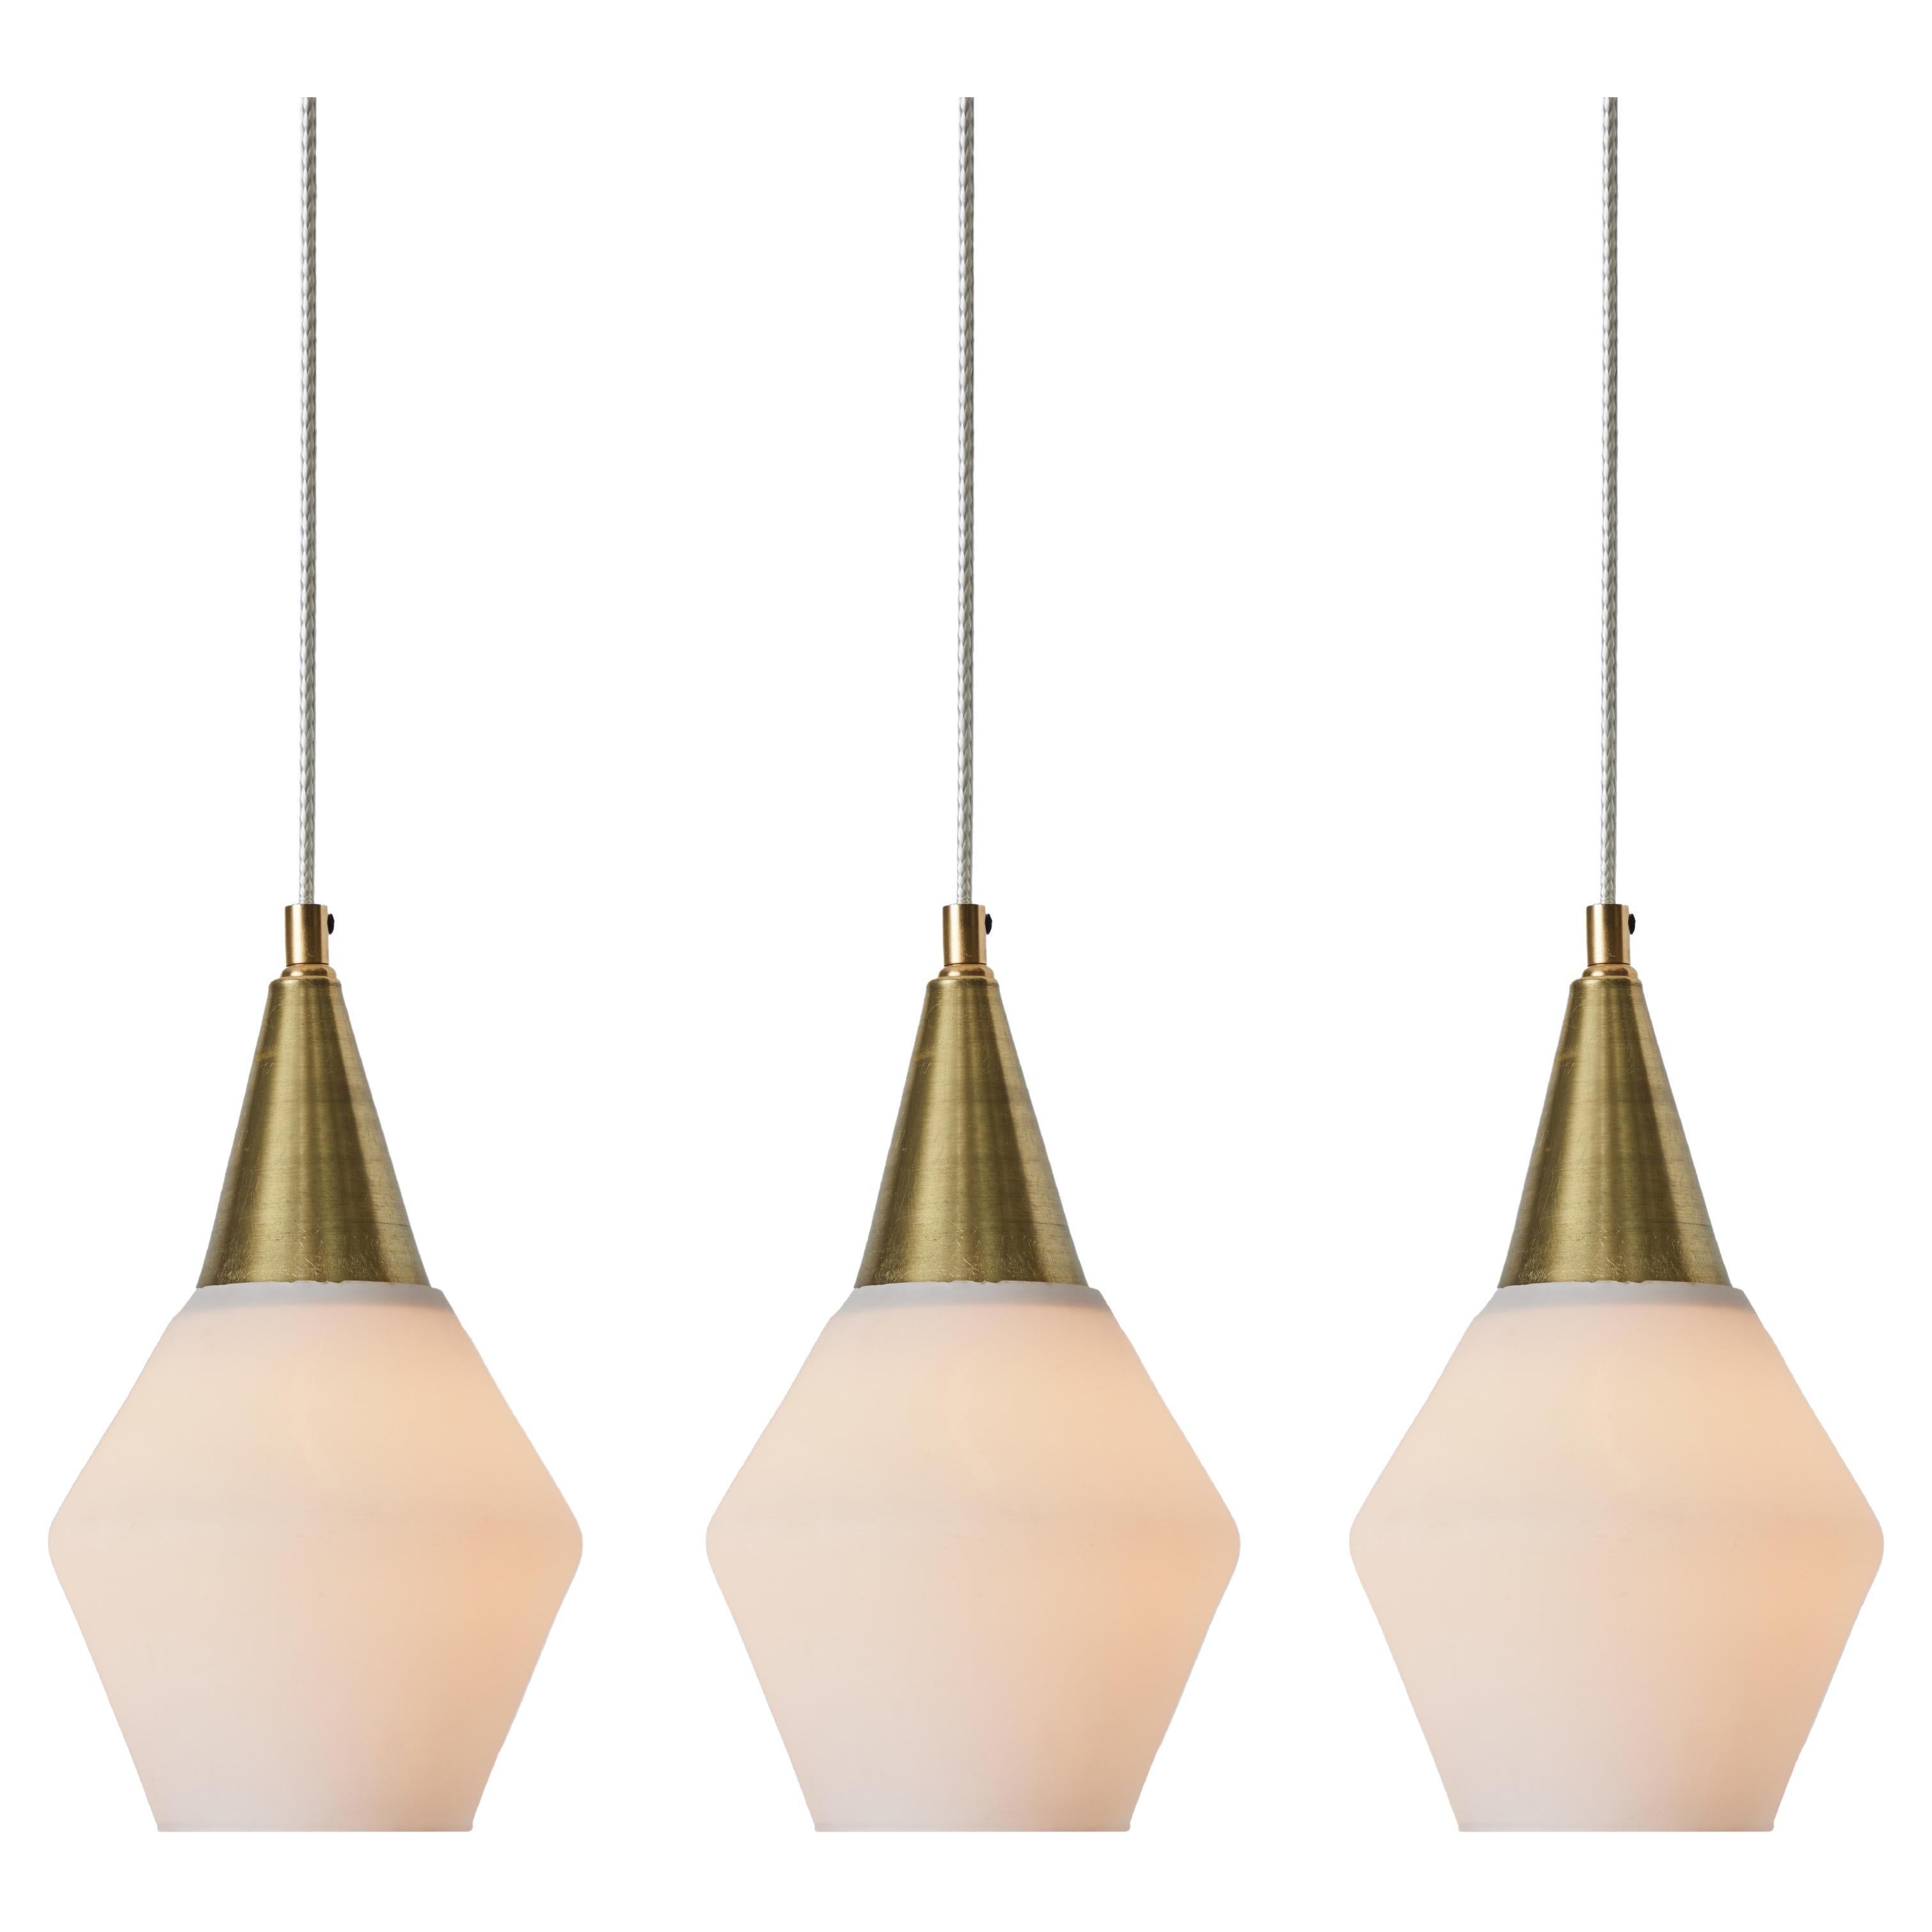 1960s Opaline Glass and Brass Pendant Attributed to Mauri Almari for Idman